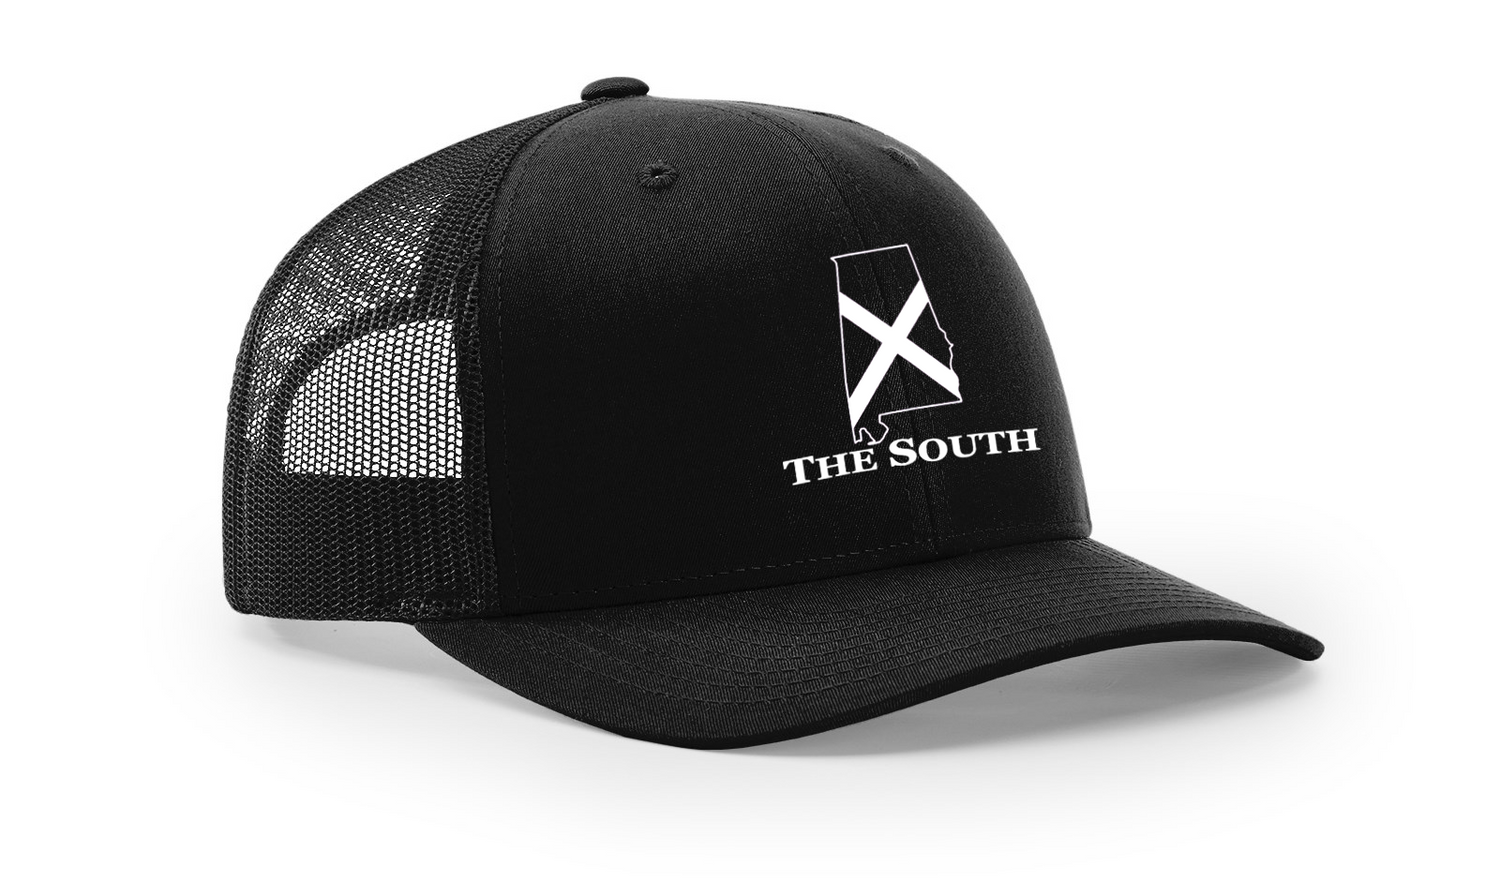 Solid Black/White - The South